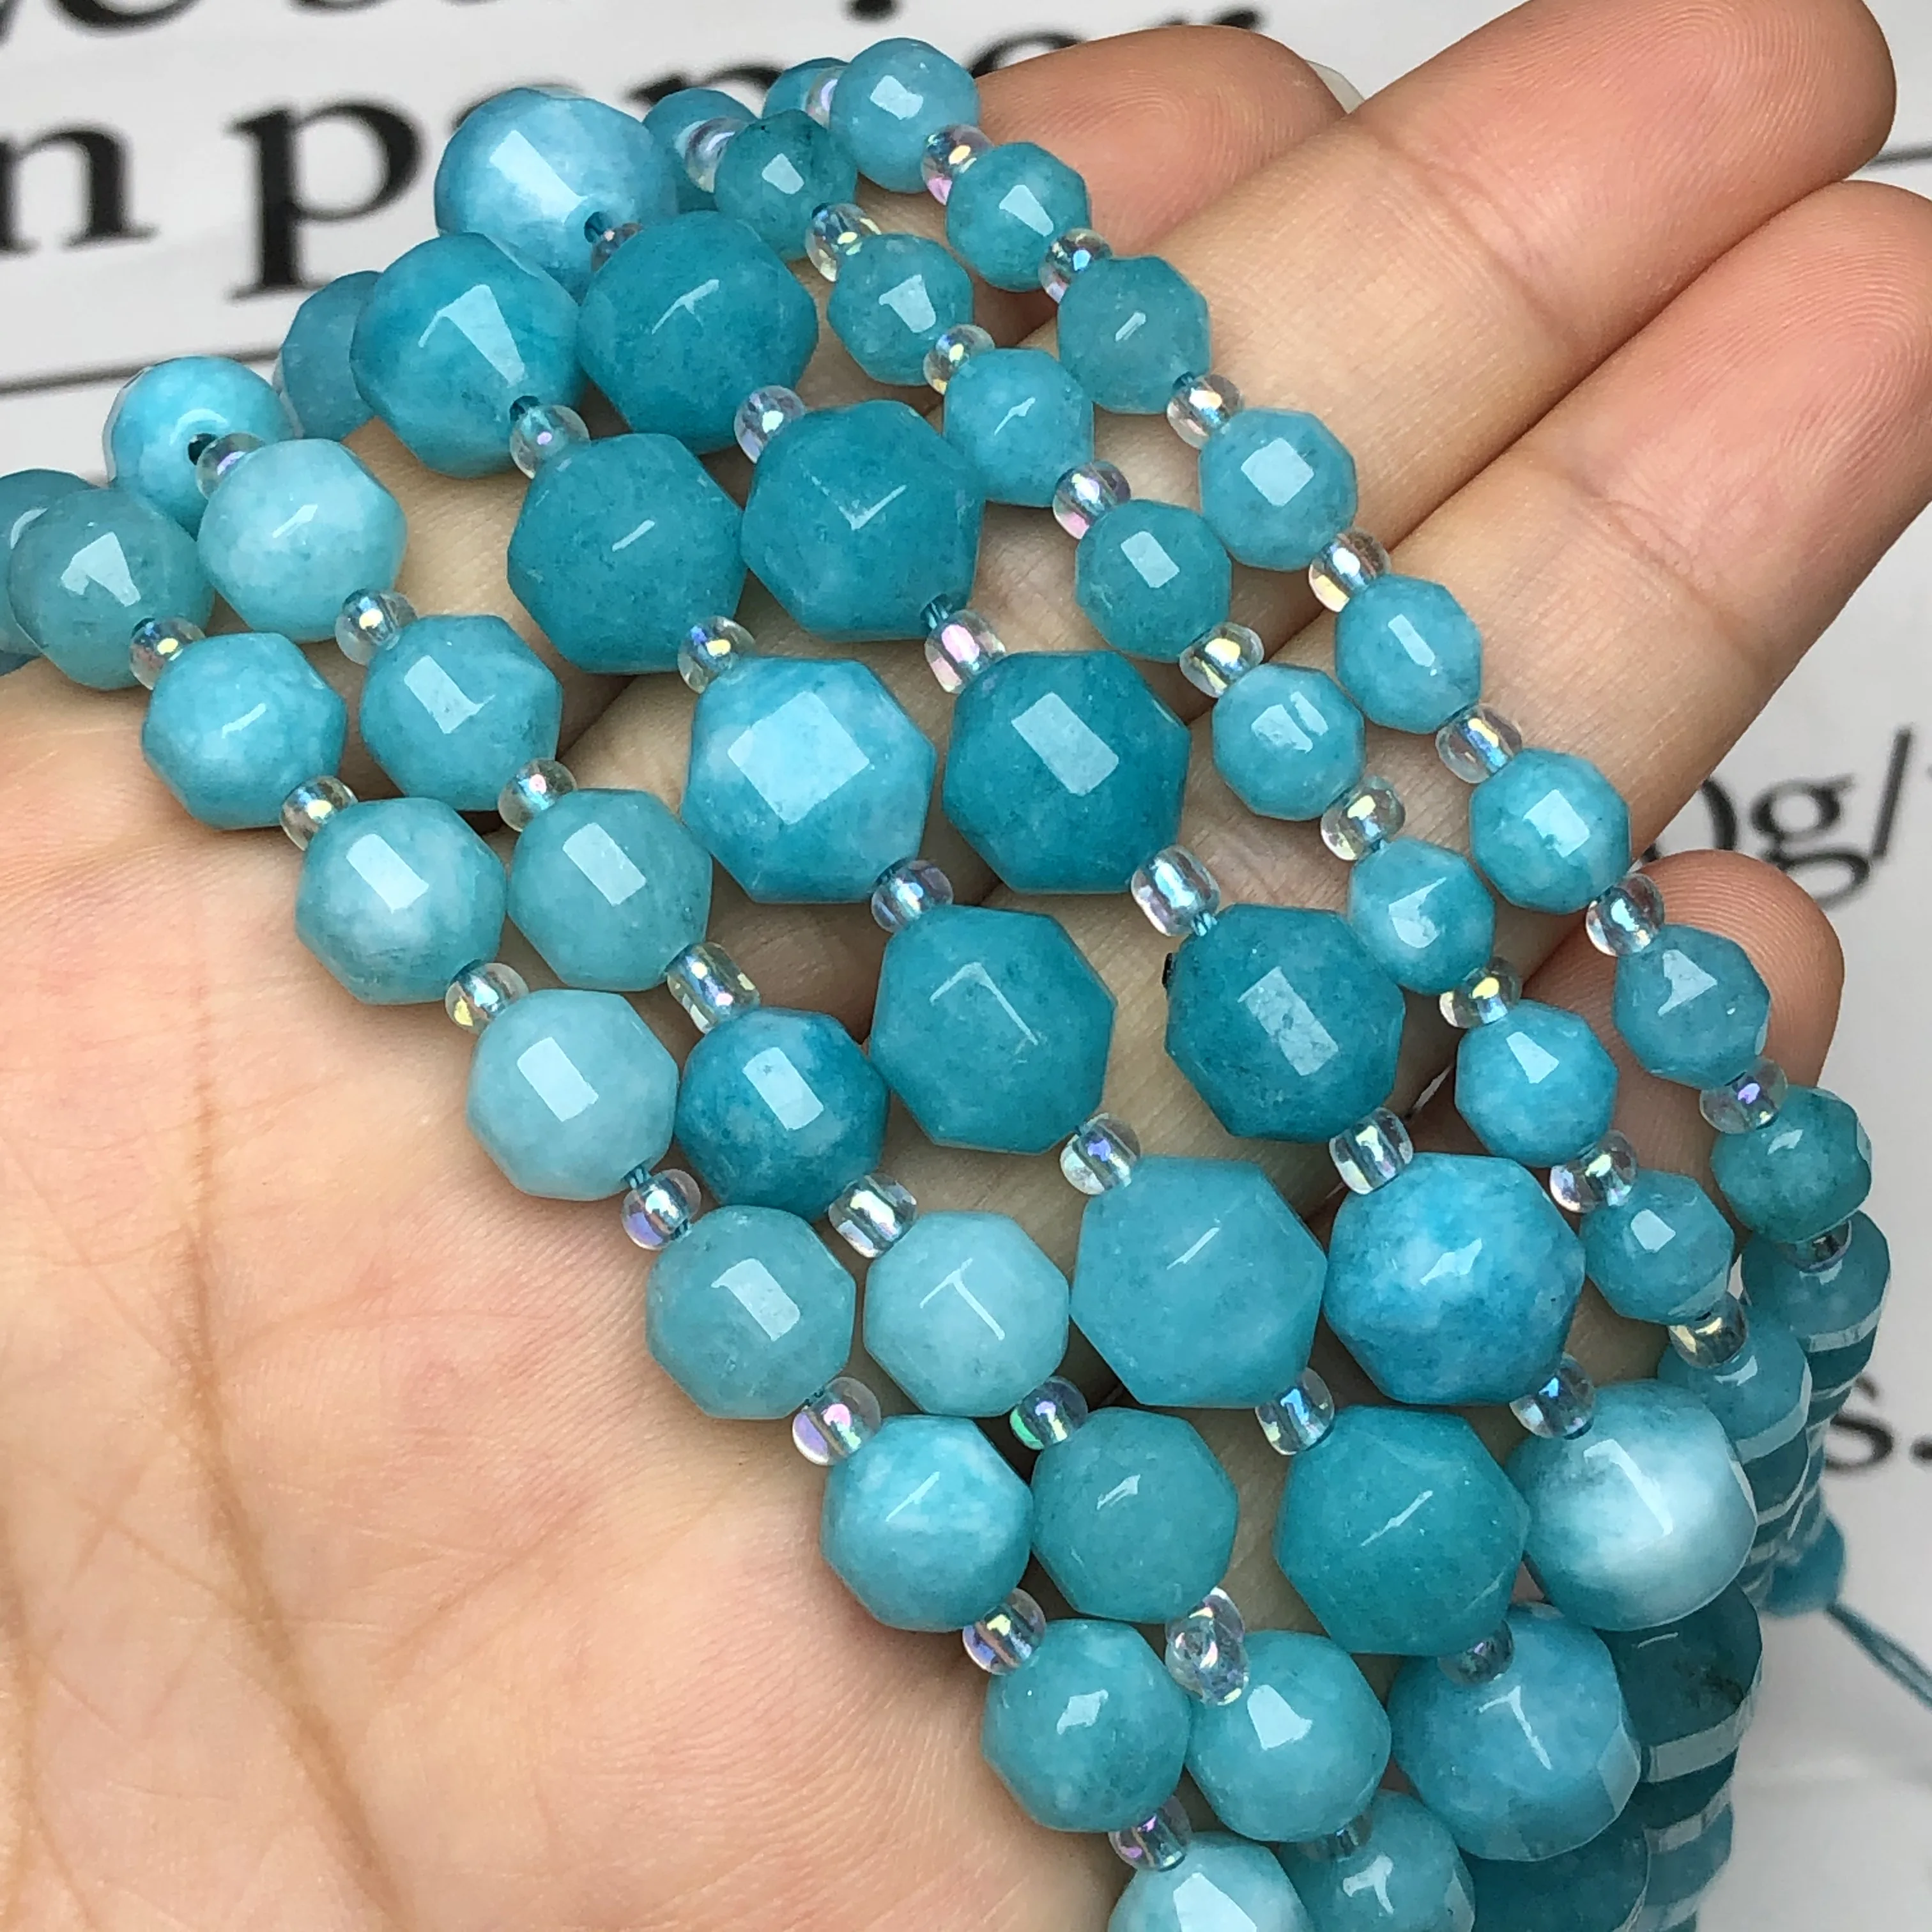 

Natural Faceted Amazonite Jades Stone Gem Beads Round Loose Spacer Beads For Jewelry Making Diy Bracelet Necklace 6/8/10MM 15"